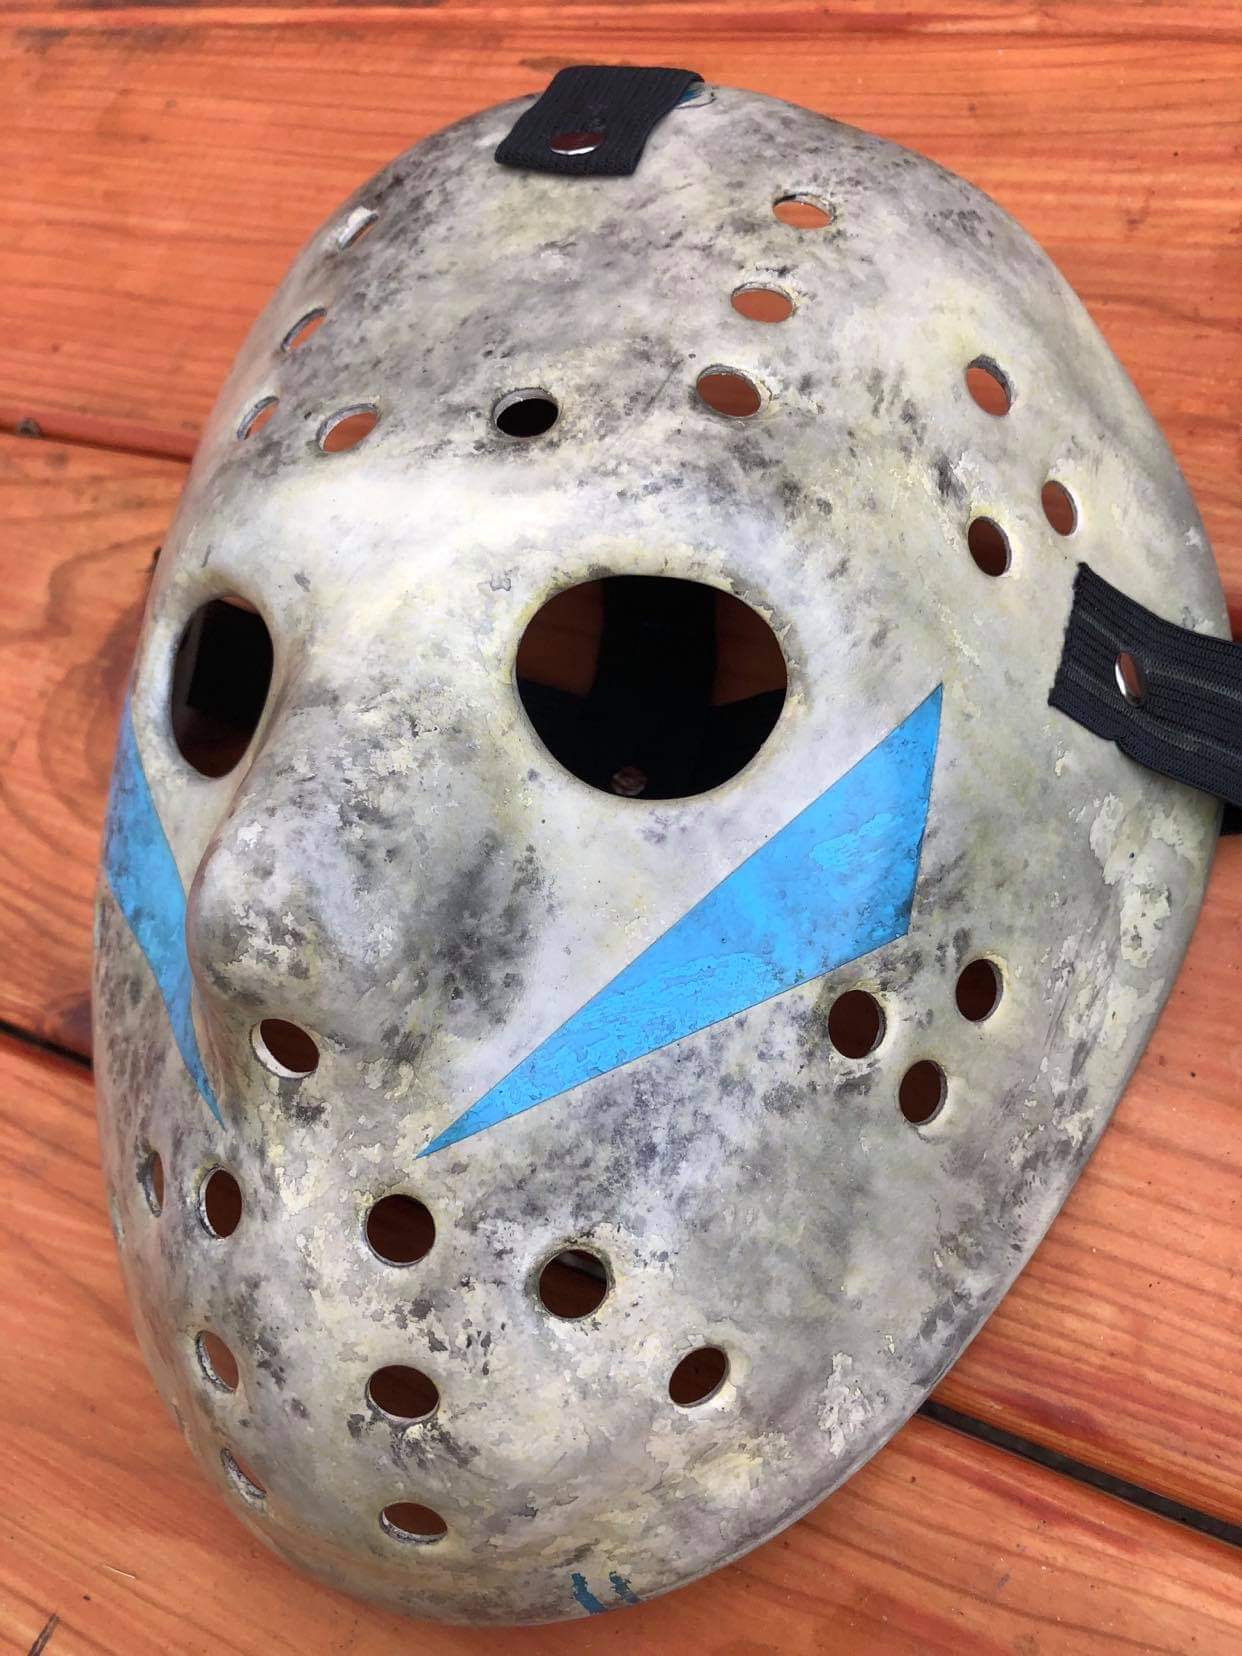 Jason Voorhees Inspired Hand Painted Weathered Full Mossy Hockey Mask